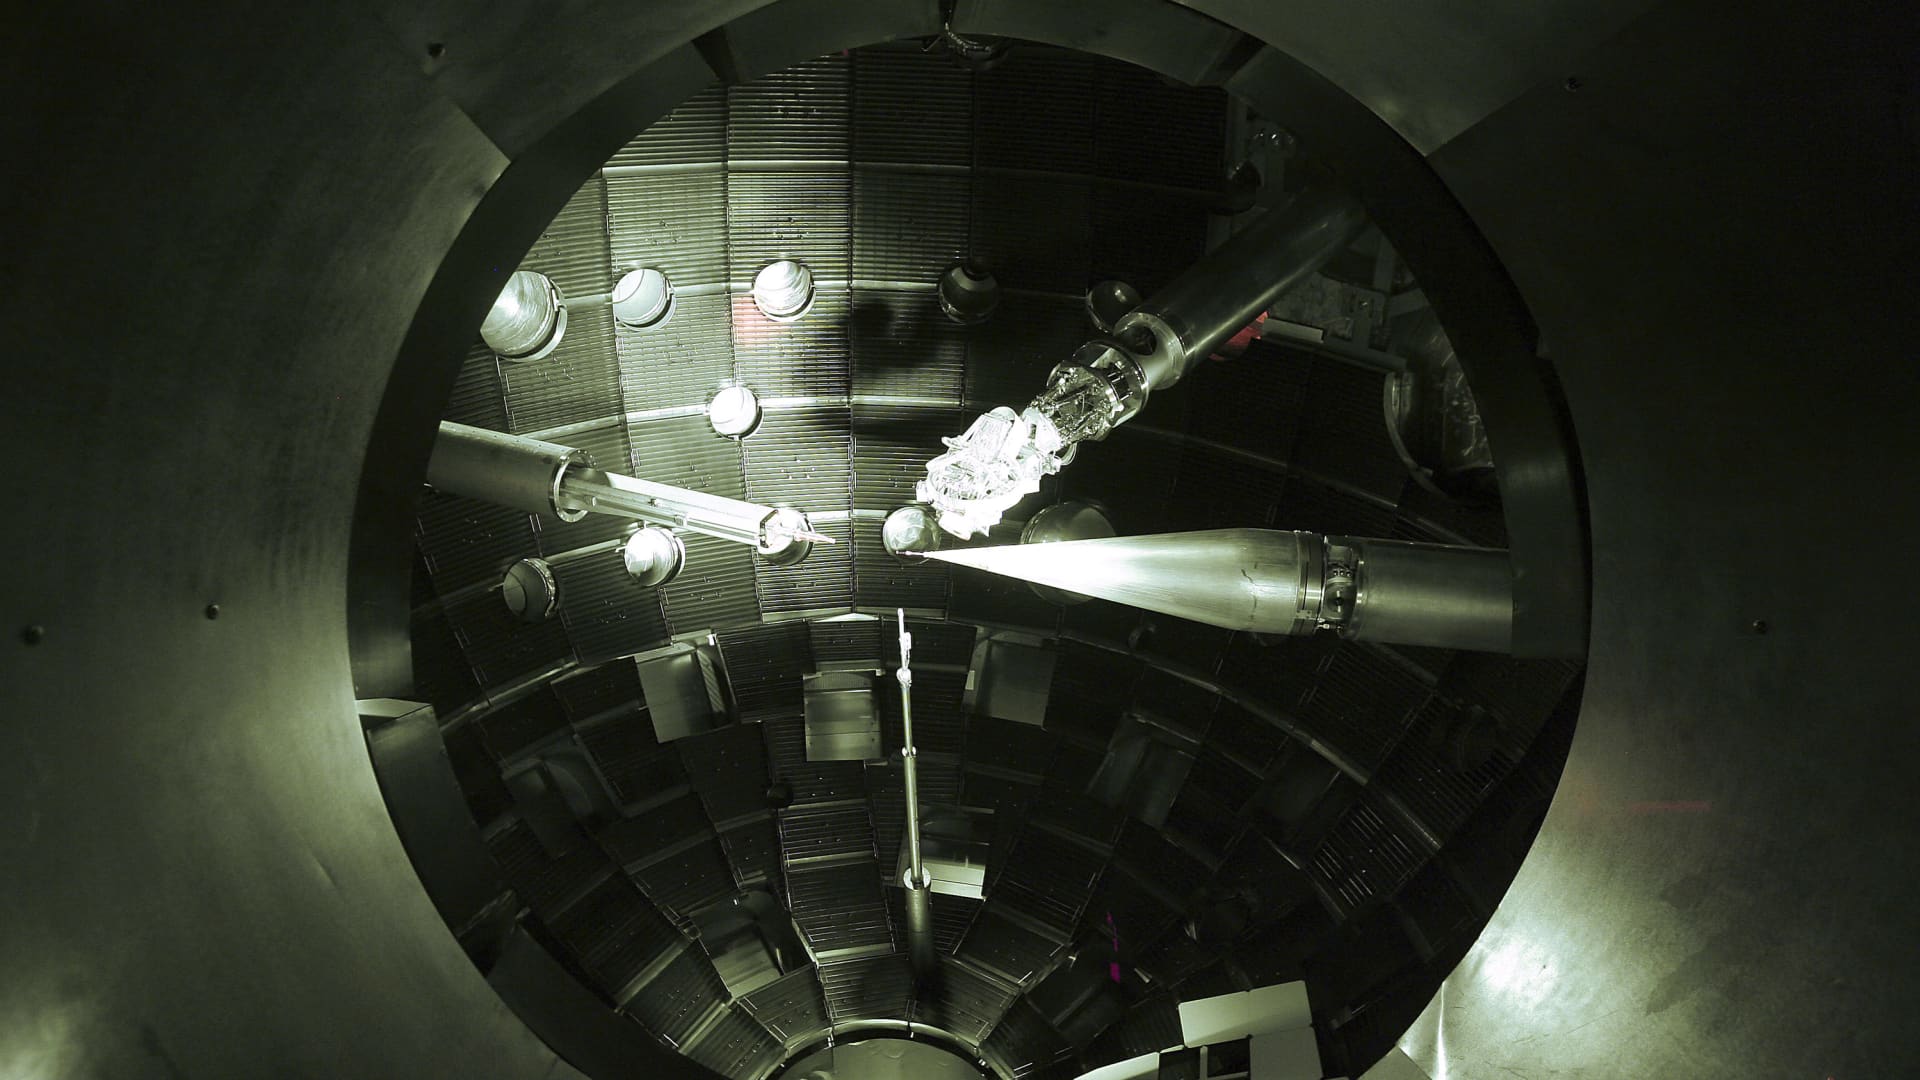 Instruments are viewed inside the target chamber at the National Ignition Facility (NIF) at the Lawrence Livermore National Laboratory in Livermore, California, U.S., on Friday, May 29, 2009. The NIF will use 192 lasers aimed at a small hydrogen-filled target for the study of fusion reactions.